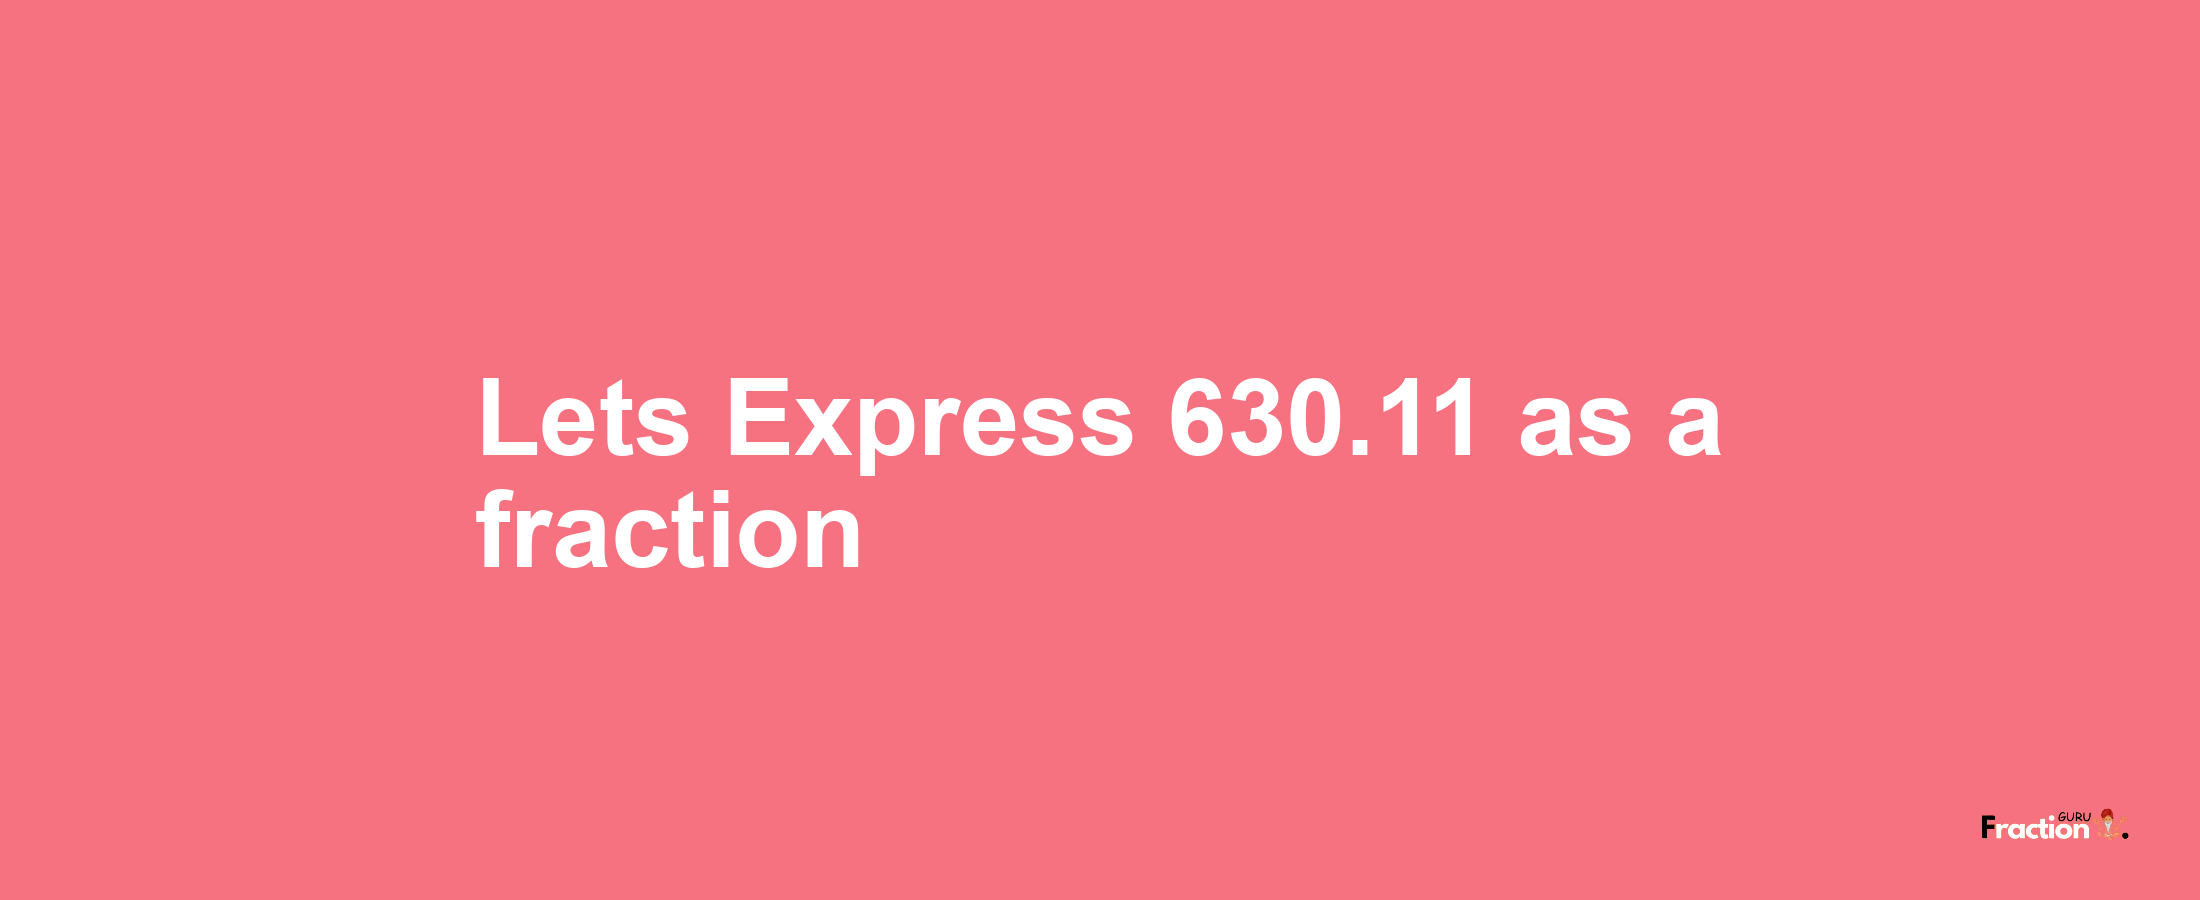 Lets Express 630.11 as afraction